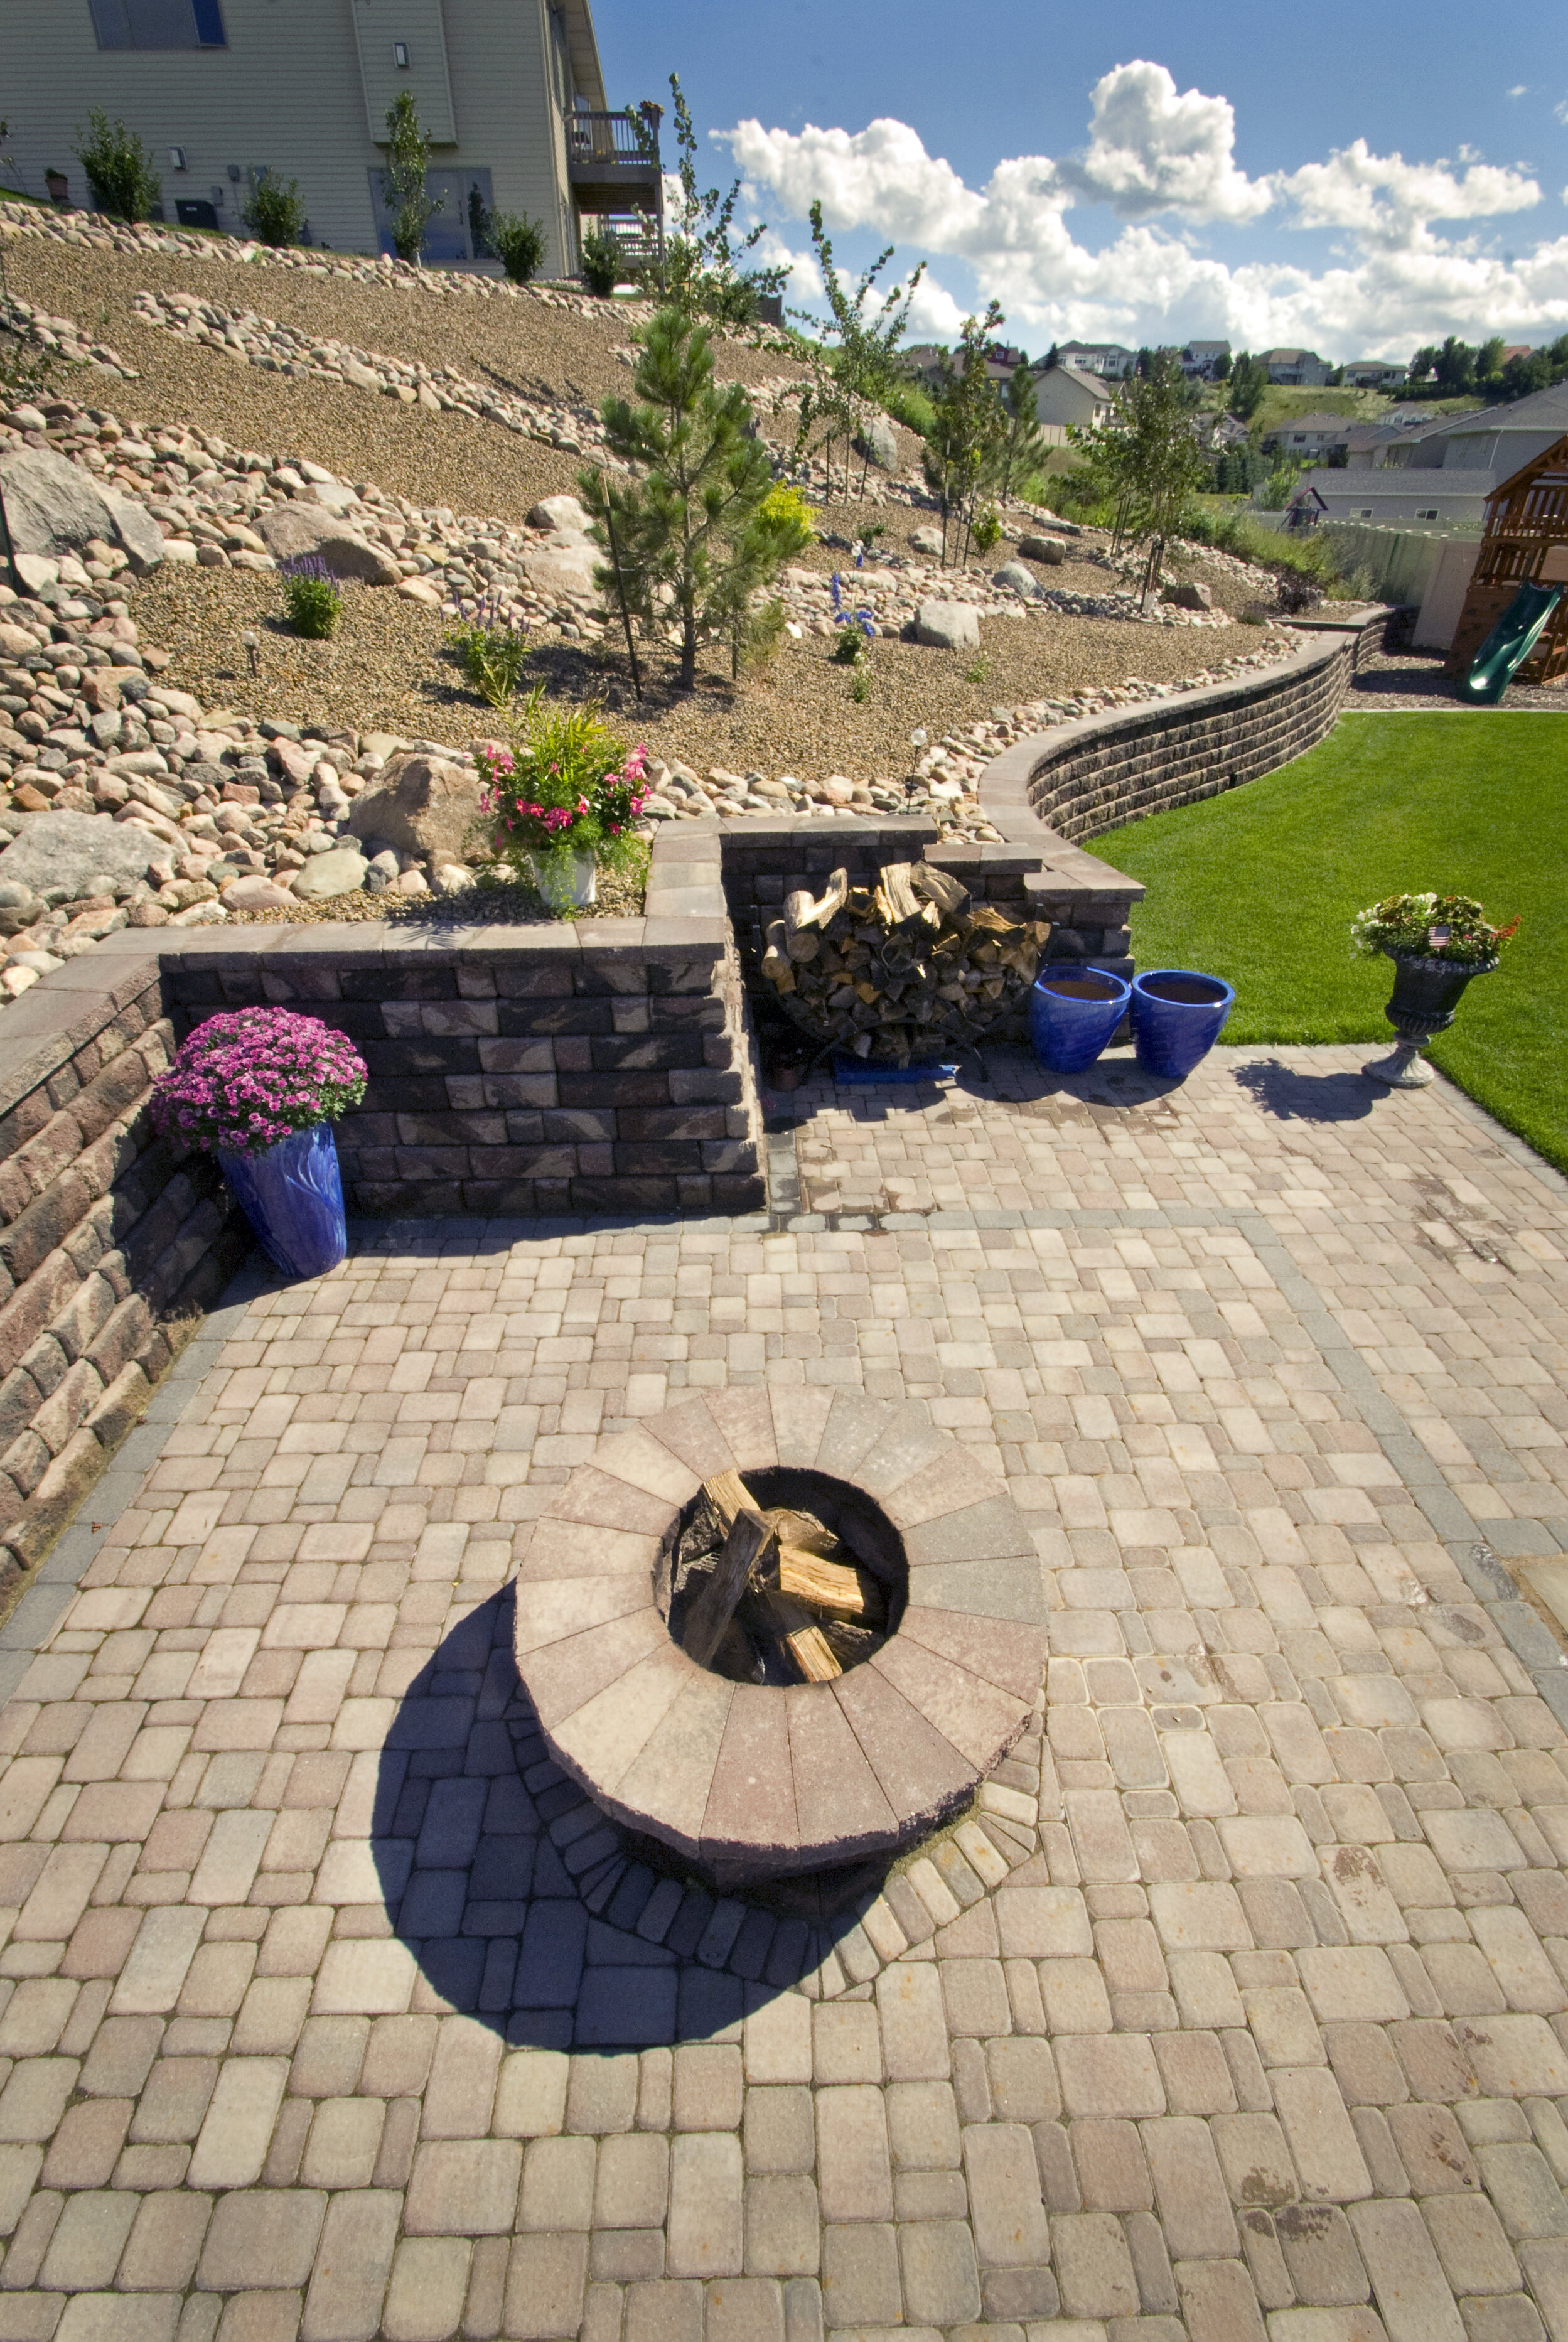 res fire pit patio block wall rock plant ALE_0352.jpg